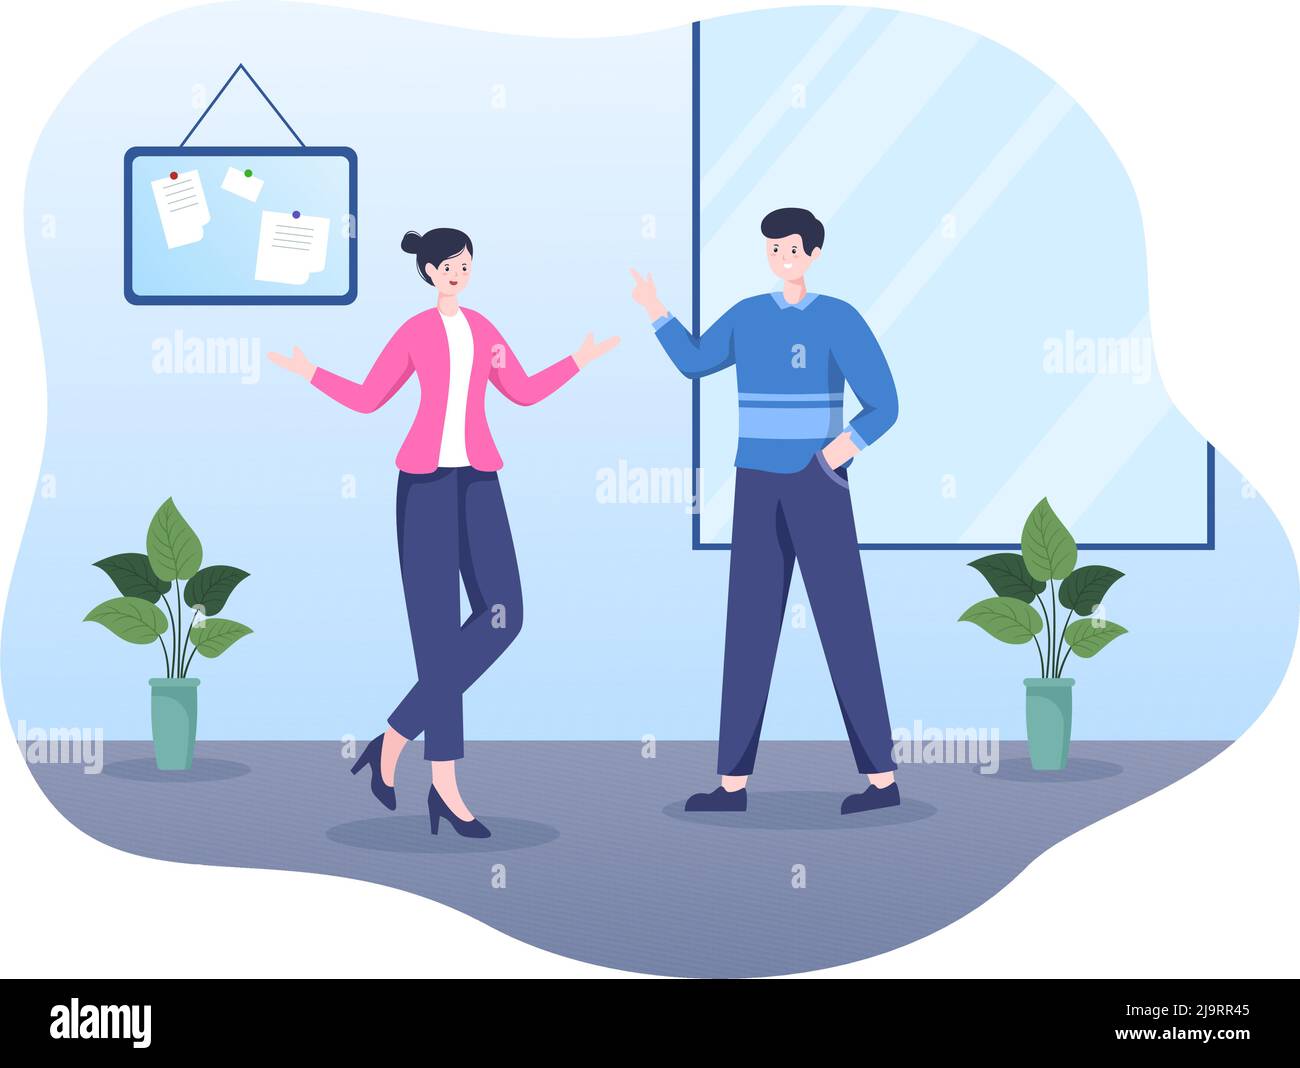 CEO or Chief Executive Officer Cartoon Illustration Businessman Work in Company as President Speech and Public Speaker in Flat Style Design Stock Vector